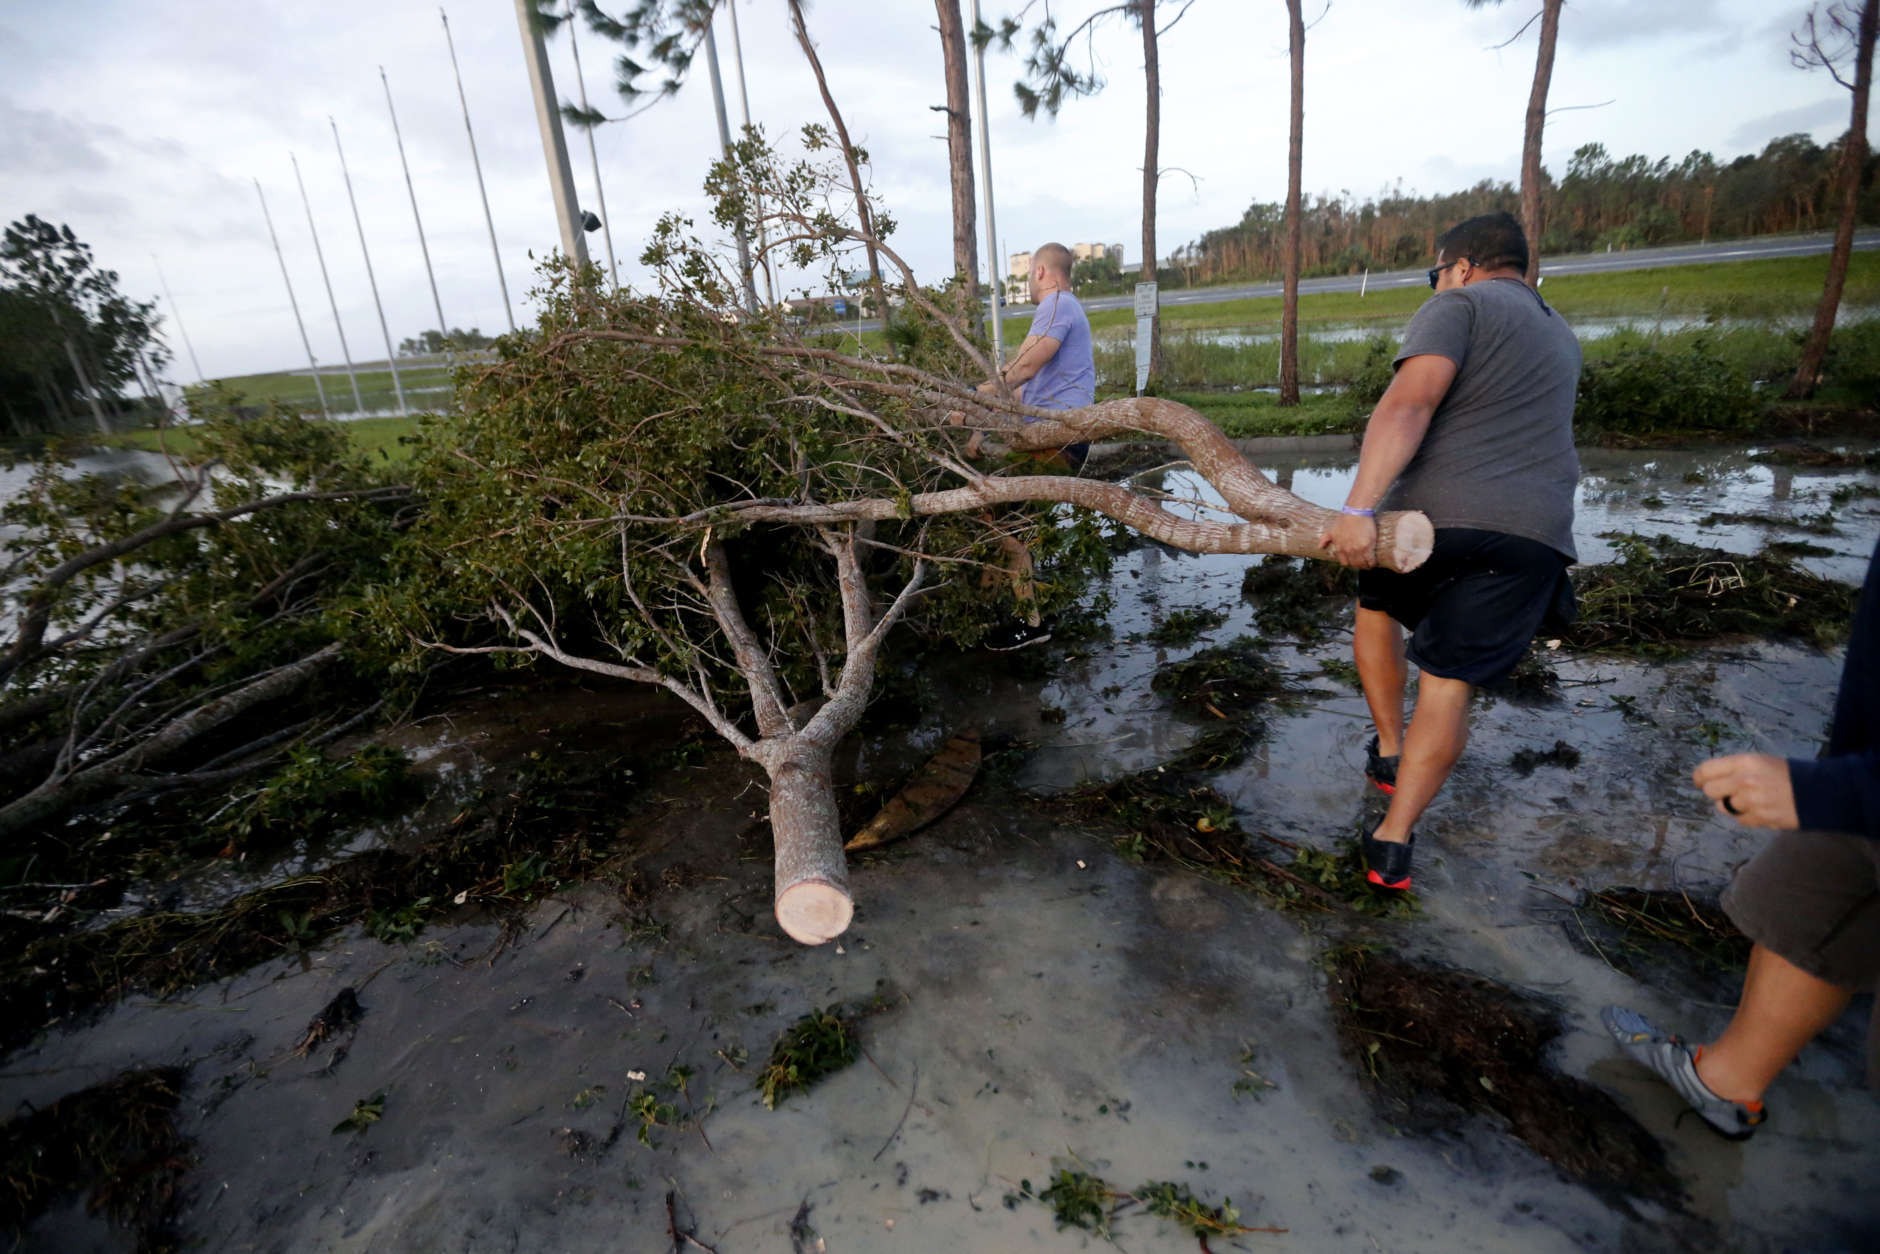 Members of the Estero Fire Department clear trees blocking roadways on their way to work, in the aftermath of Hurricane Irma, which passed through yesterday, in Estero, Fla., Monday, Sept. 11, 2017. (AP Photo/Gerald Herbert)